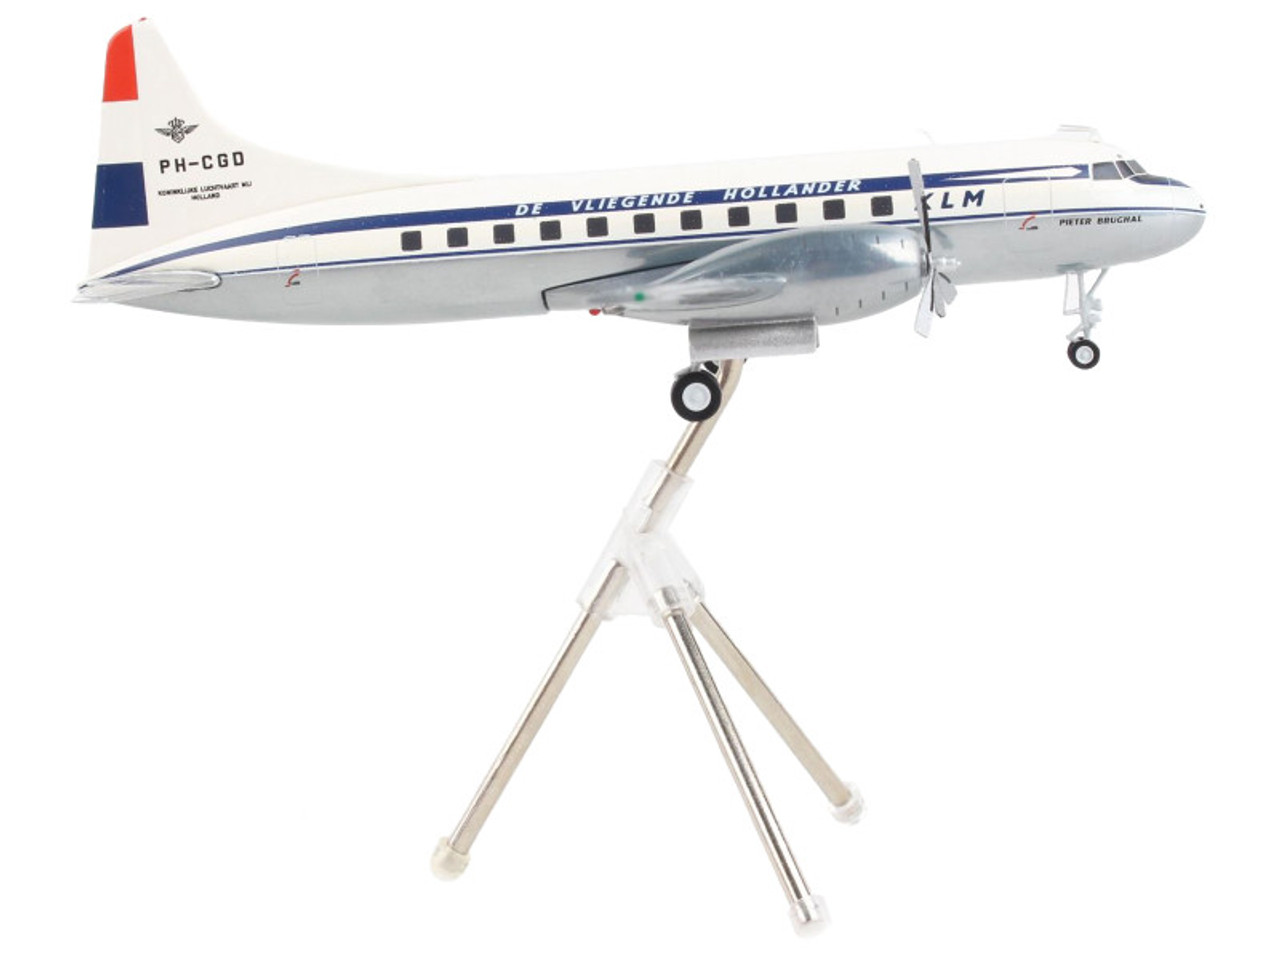 Convair CV-340 Commercial Aircraft "Royal Dutch Airlines - The Flying Dutchman" White with Dark Blue Stripes "Gemini 200" Series 1/200 Diecast Model Airplane by GeminiJets